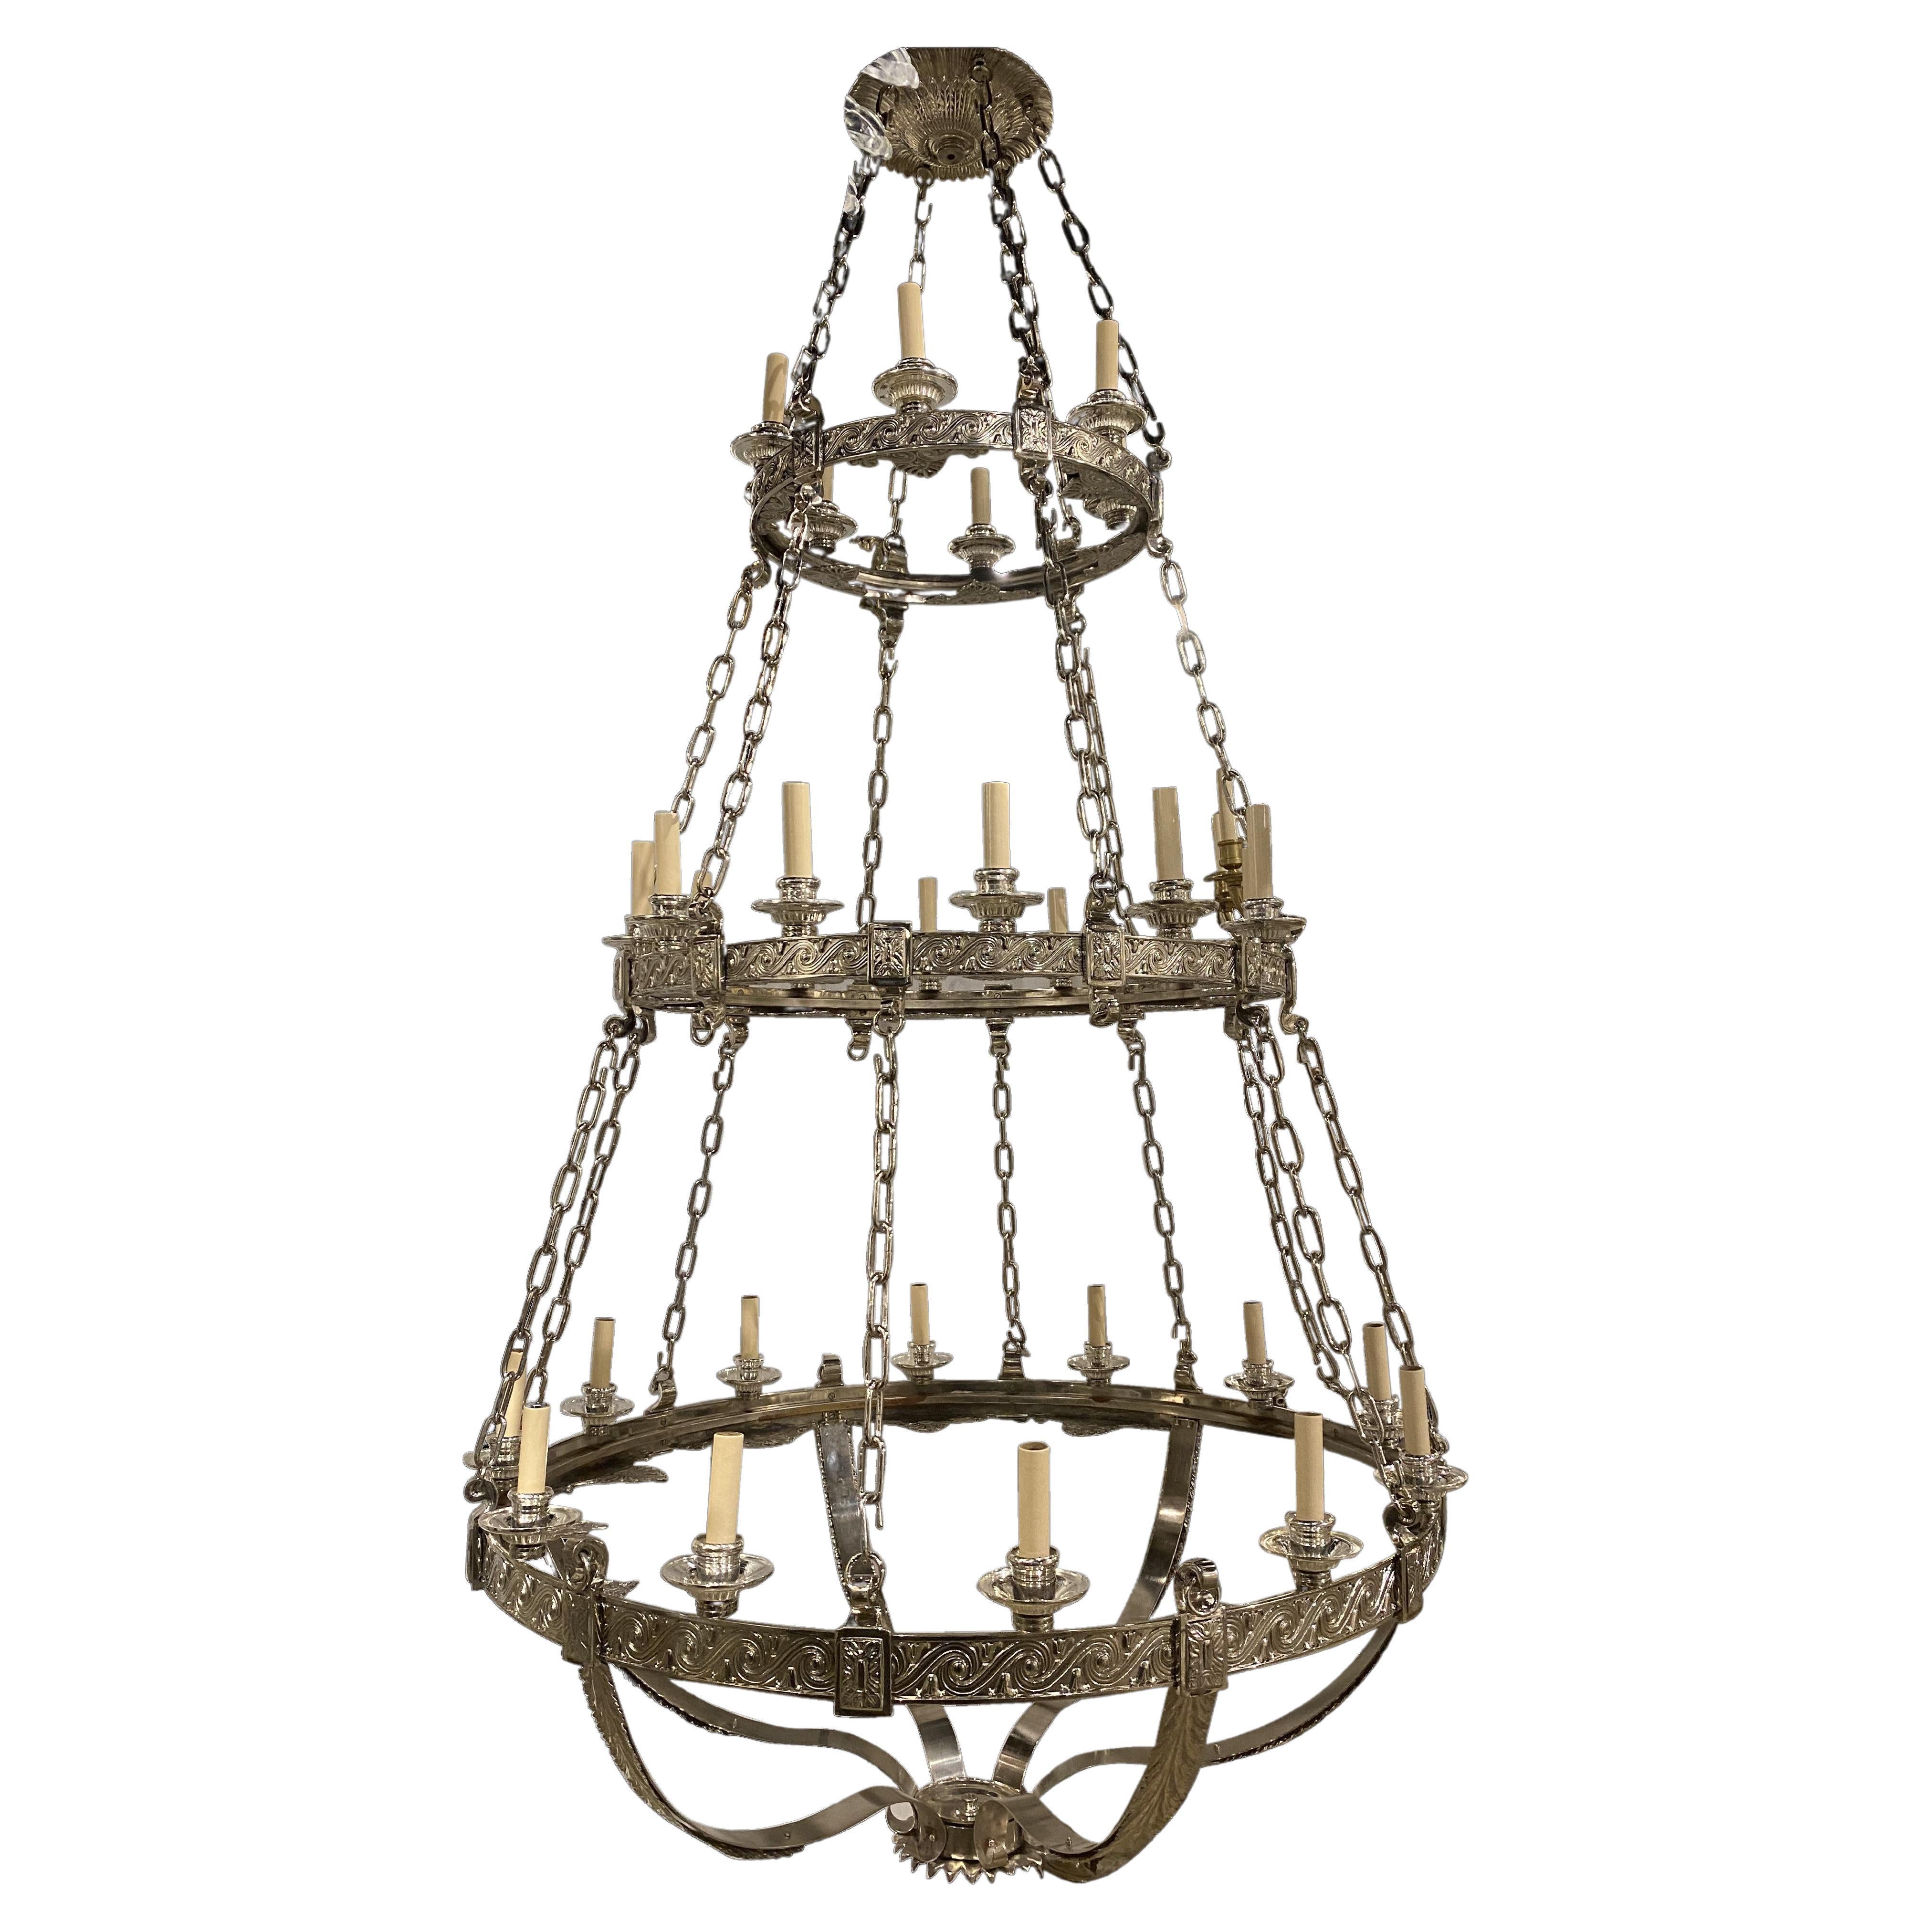 1900's Large Neoclassic Silver Plated Chandelier For Sale